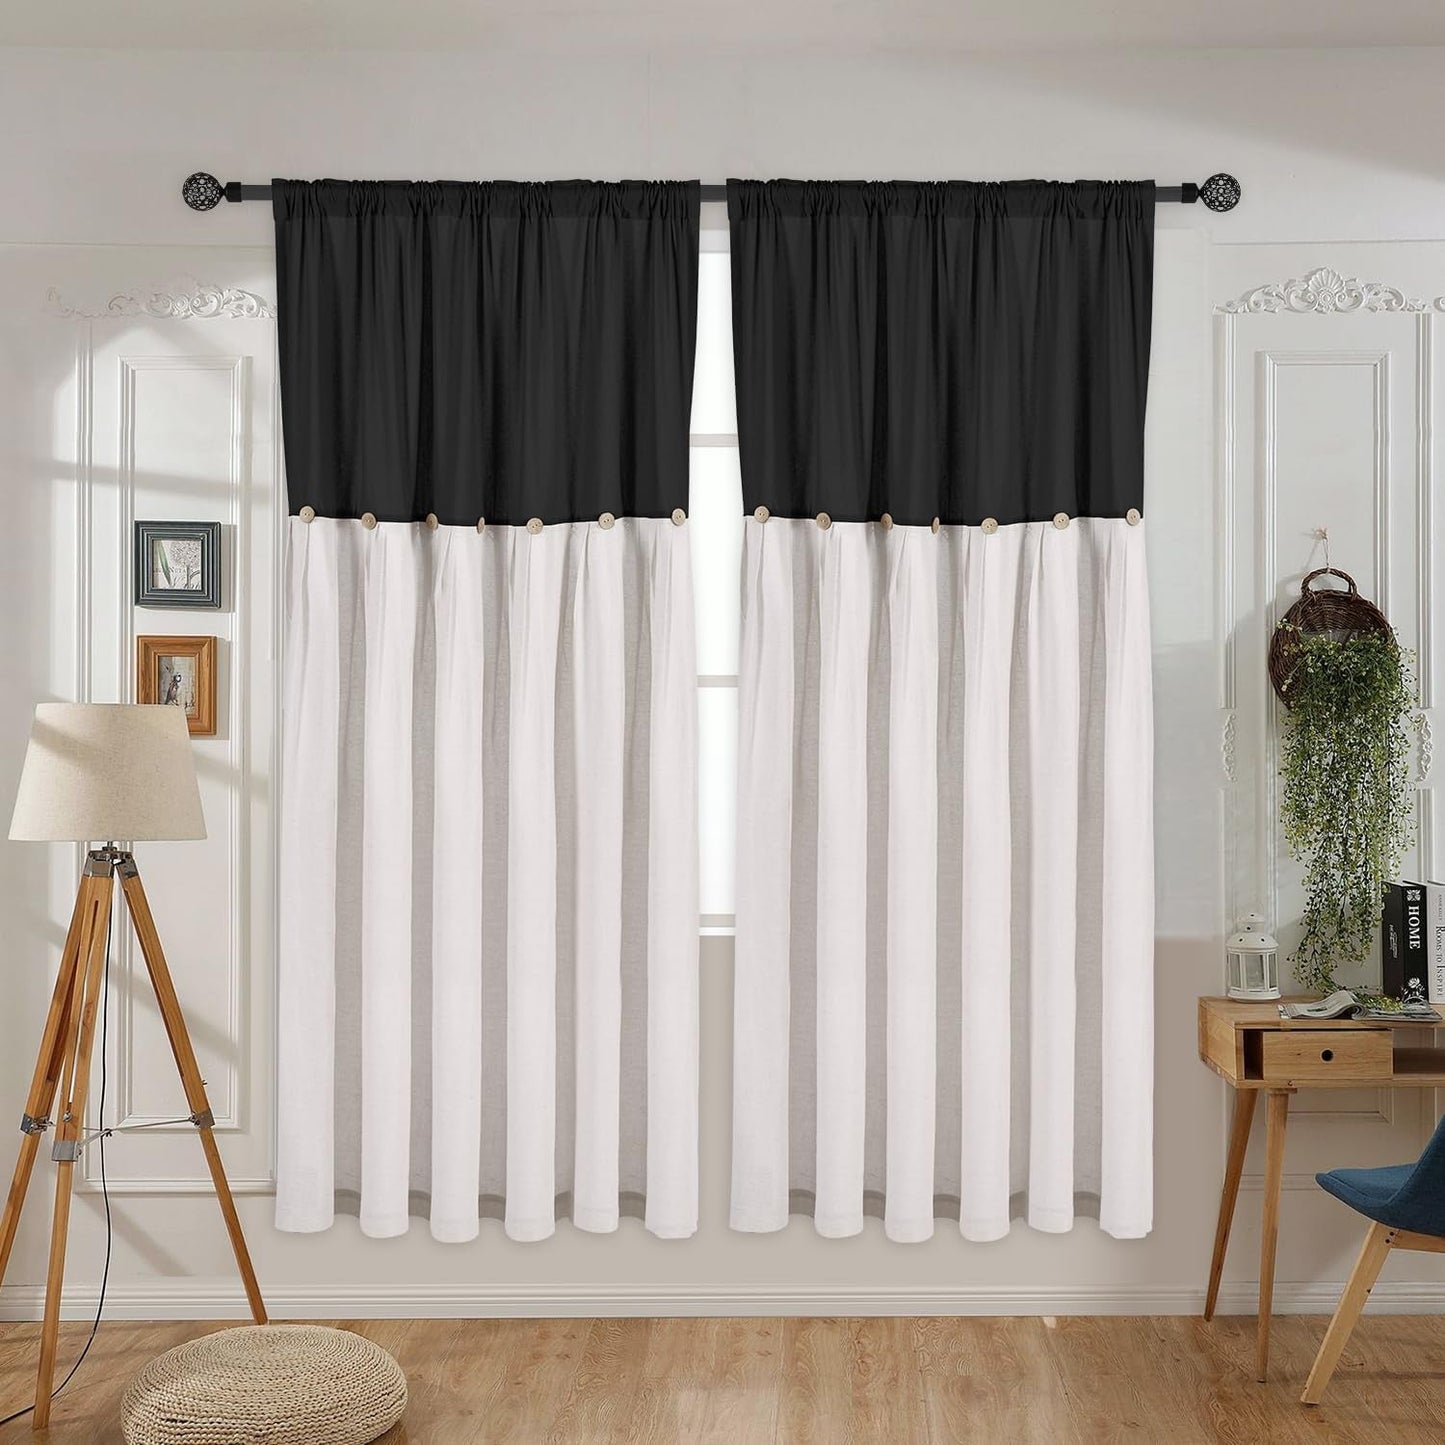 Cotton Linen Farmhouse Curtains, Button Curtains (Two Panels) Pleated Natural, Linen Button Window Curtain Panel for Bedroom Living Room (Black, 42 X 63 Inches)